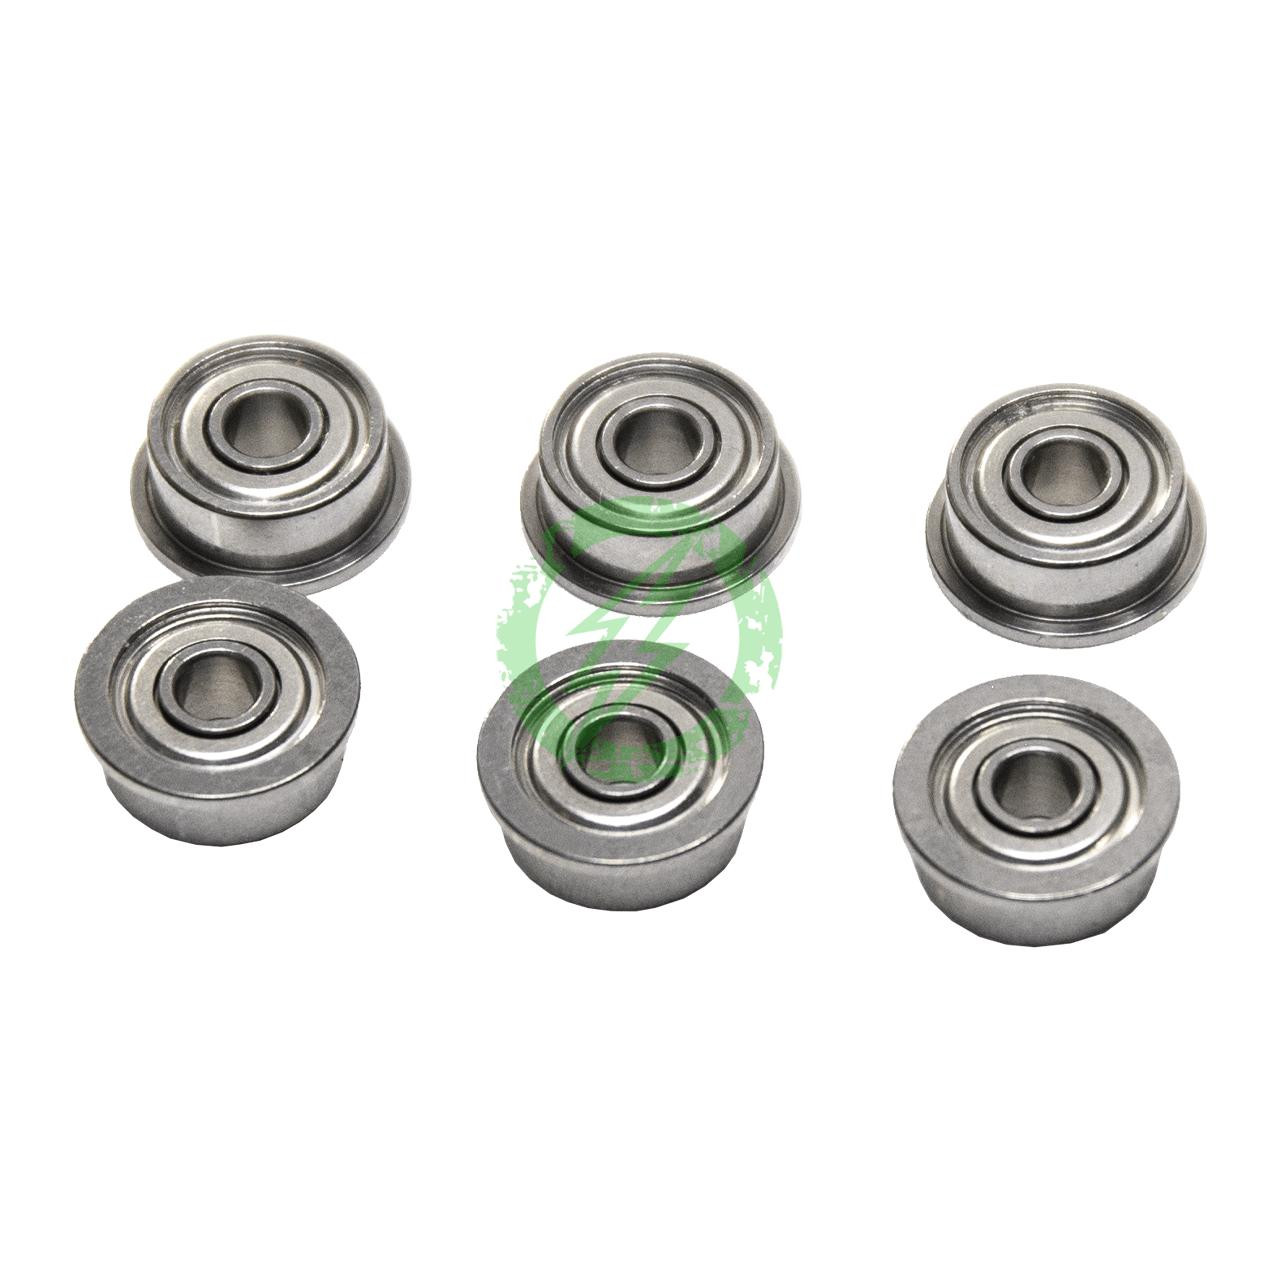  EZO 9mm J-Caged Shielded Stainless Steel Ball Bearing 